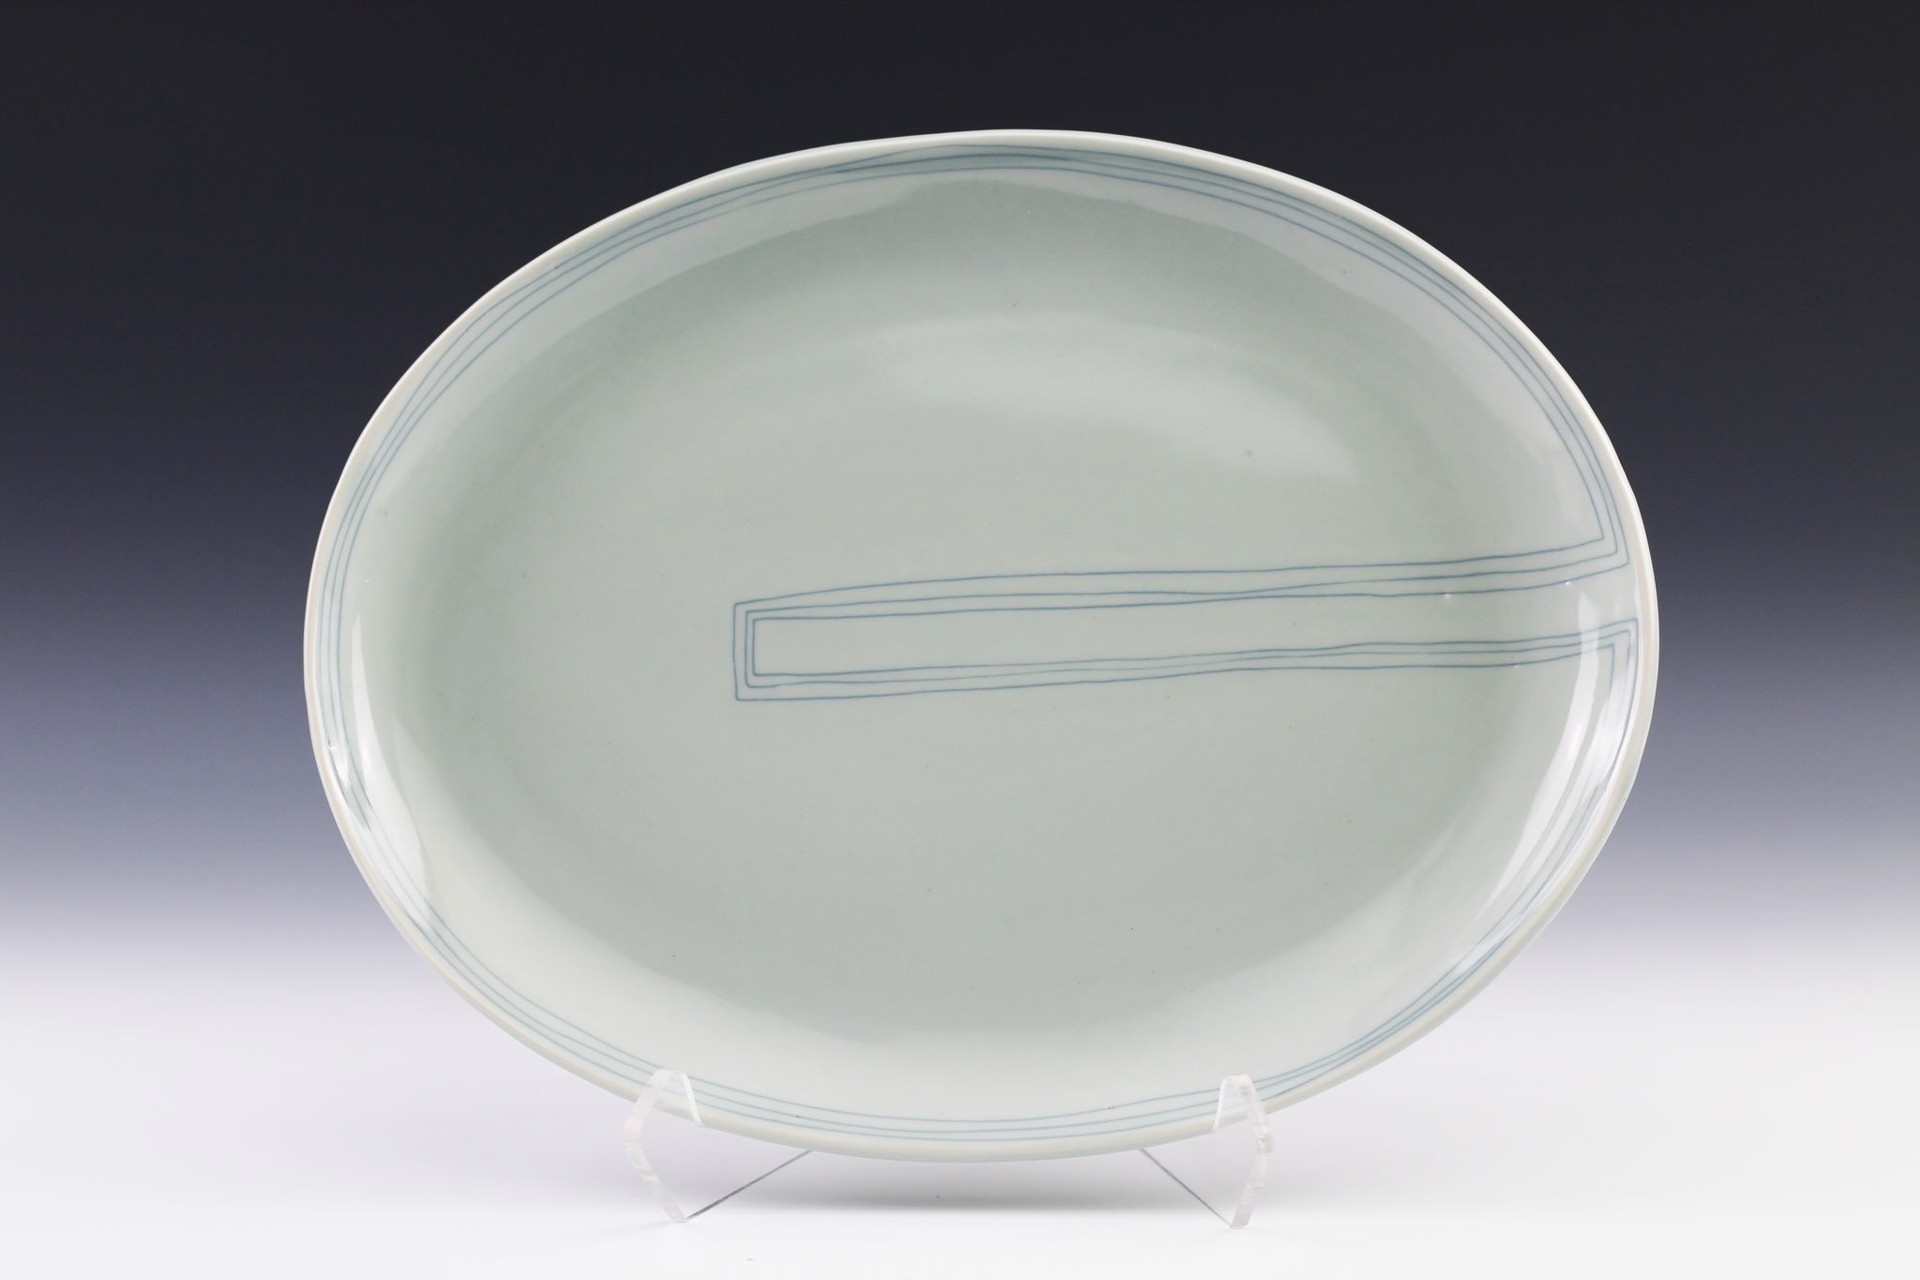 Serving Platter by Rob Cartelli